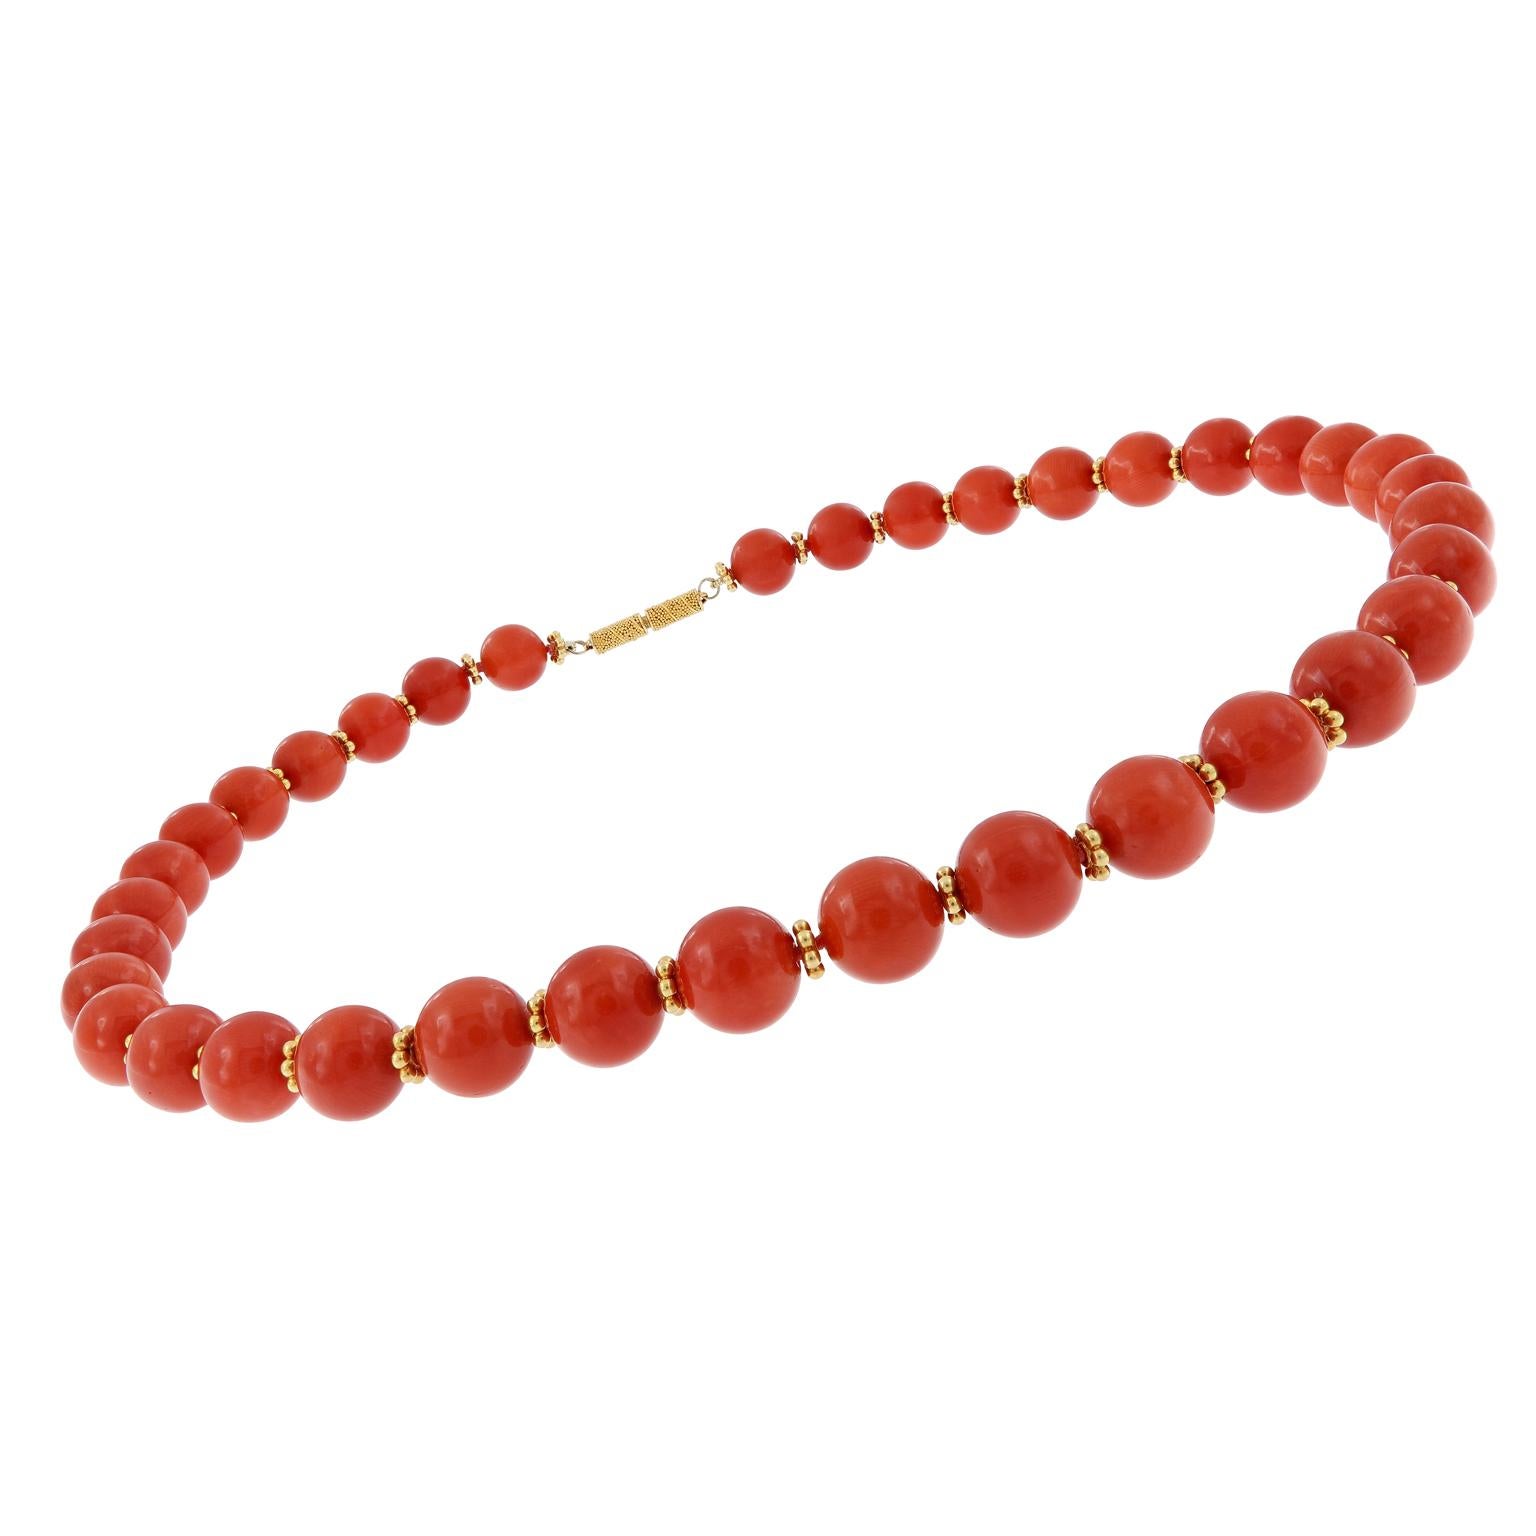 This natural coral is a sensuous deep orangish red. It creates a soft flattering glow when worn. The weight and warmth of exquisite coral is indescribable. The increasing price and rarity of quality coral make the gem a good investment. This